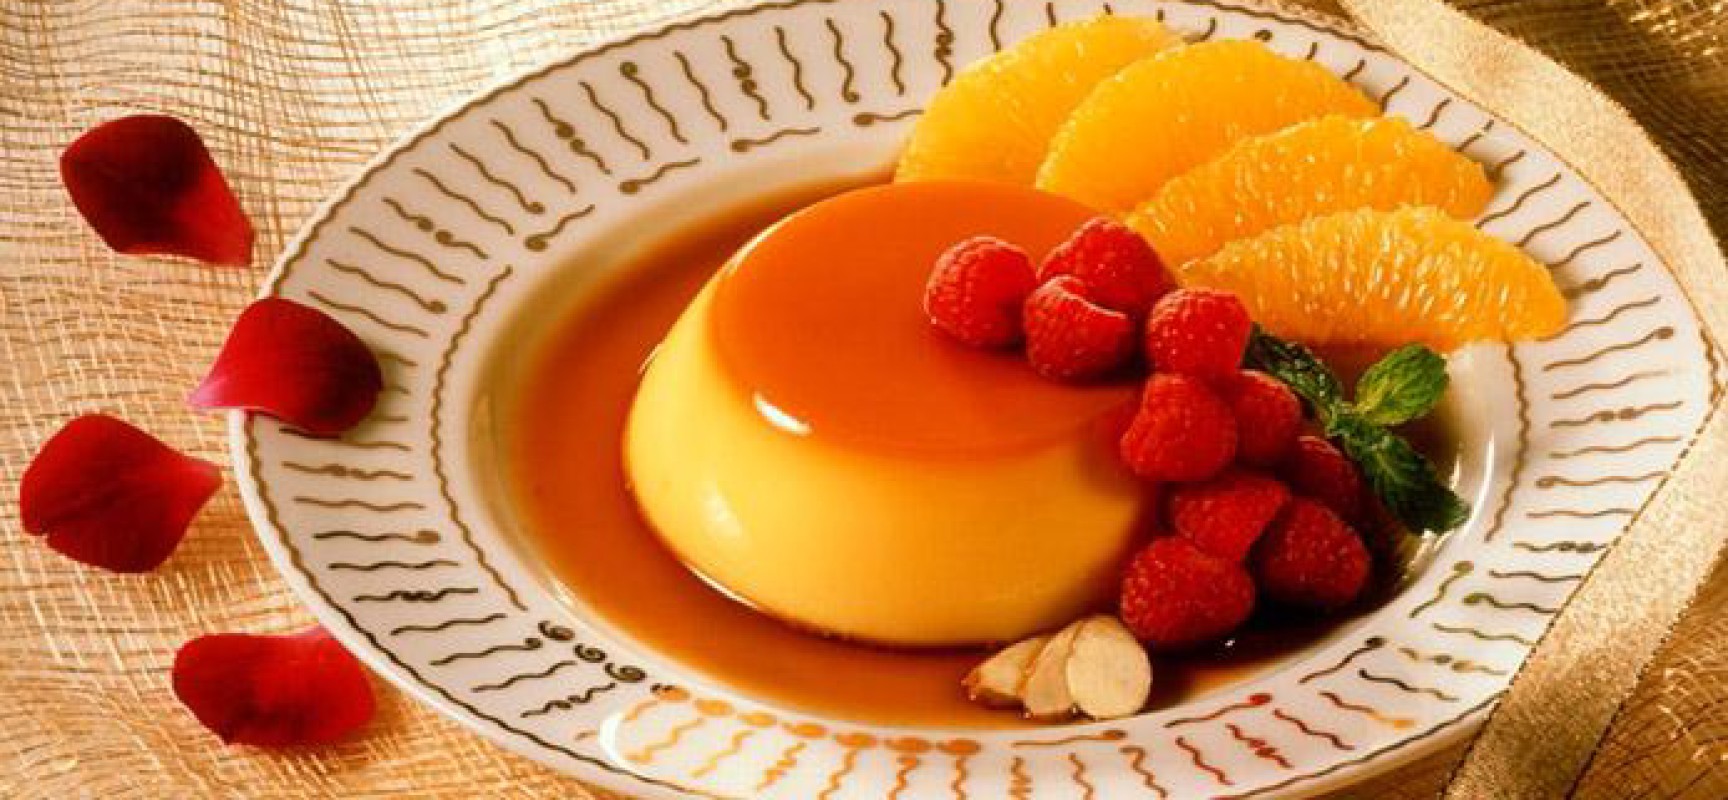 14 STEPS TO A PERFECT CARAMEL PUDDING